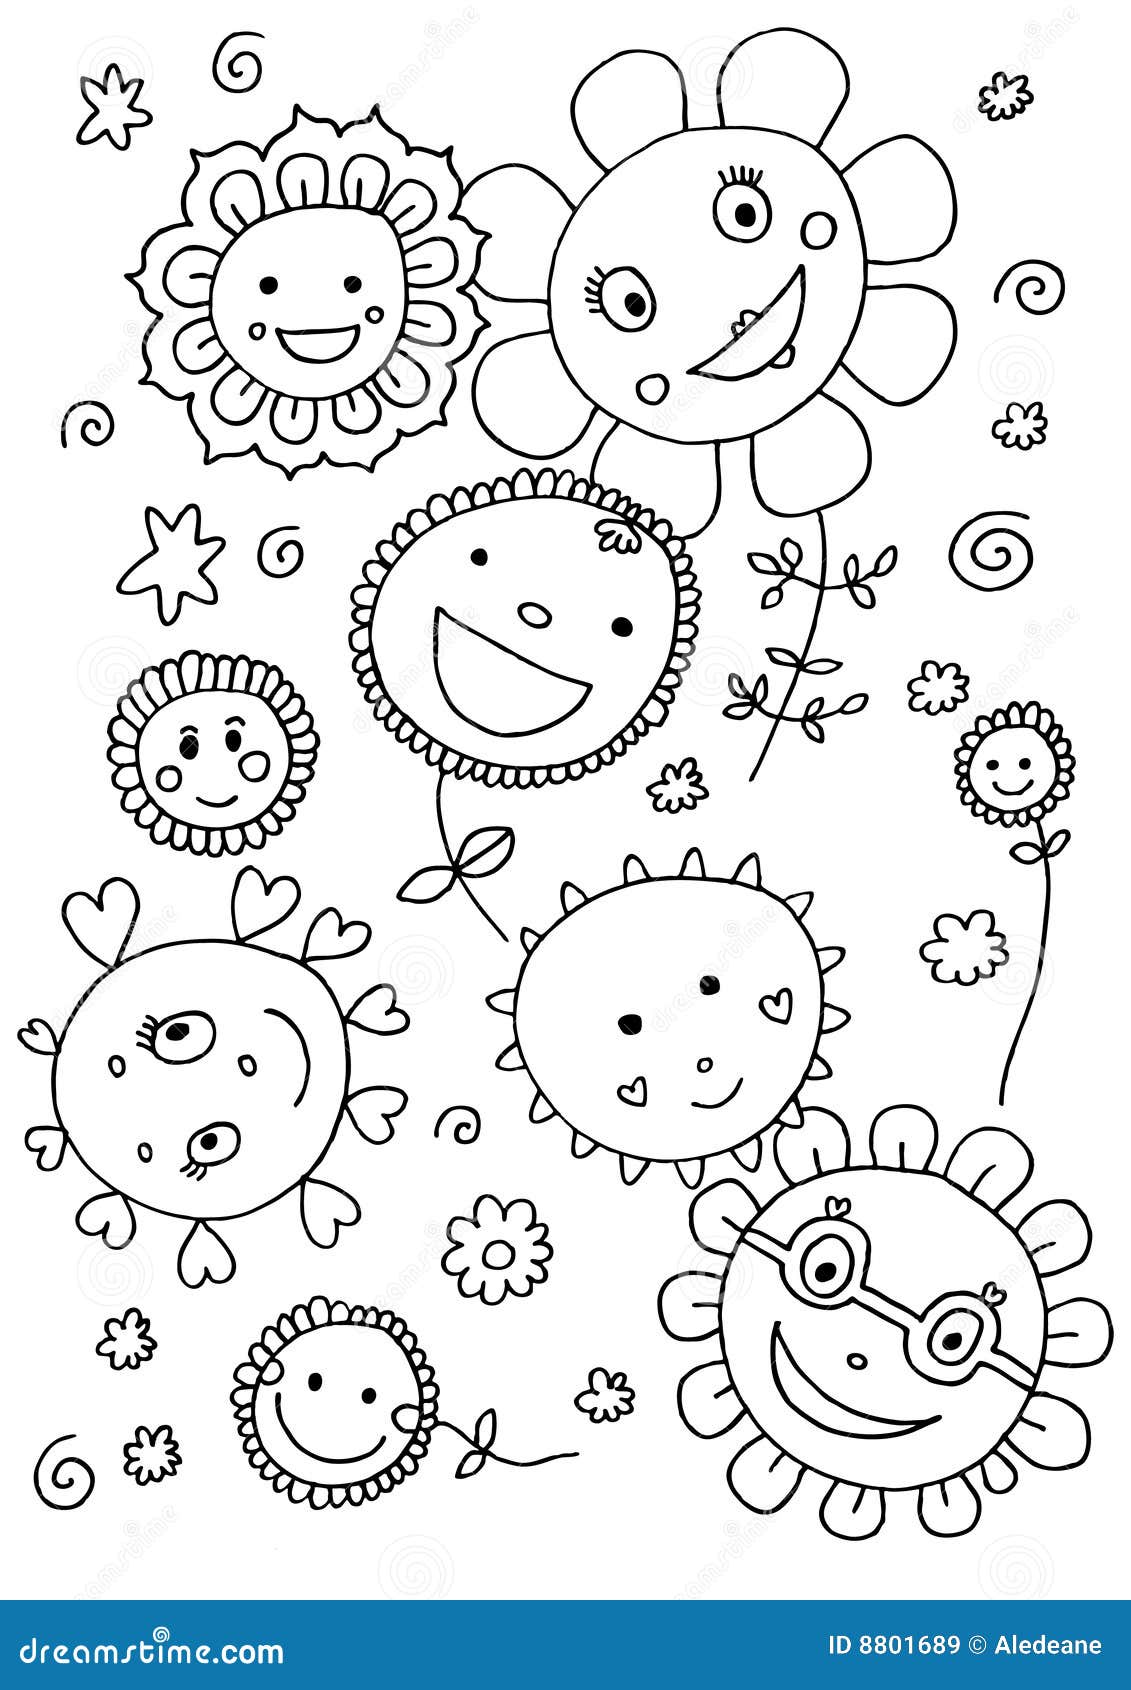 Cute Flowers Coloring Page Royalty Free Stock Images - Image: 8801689